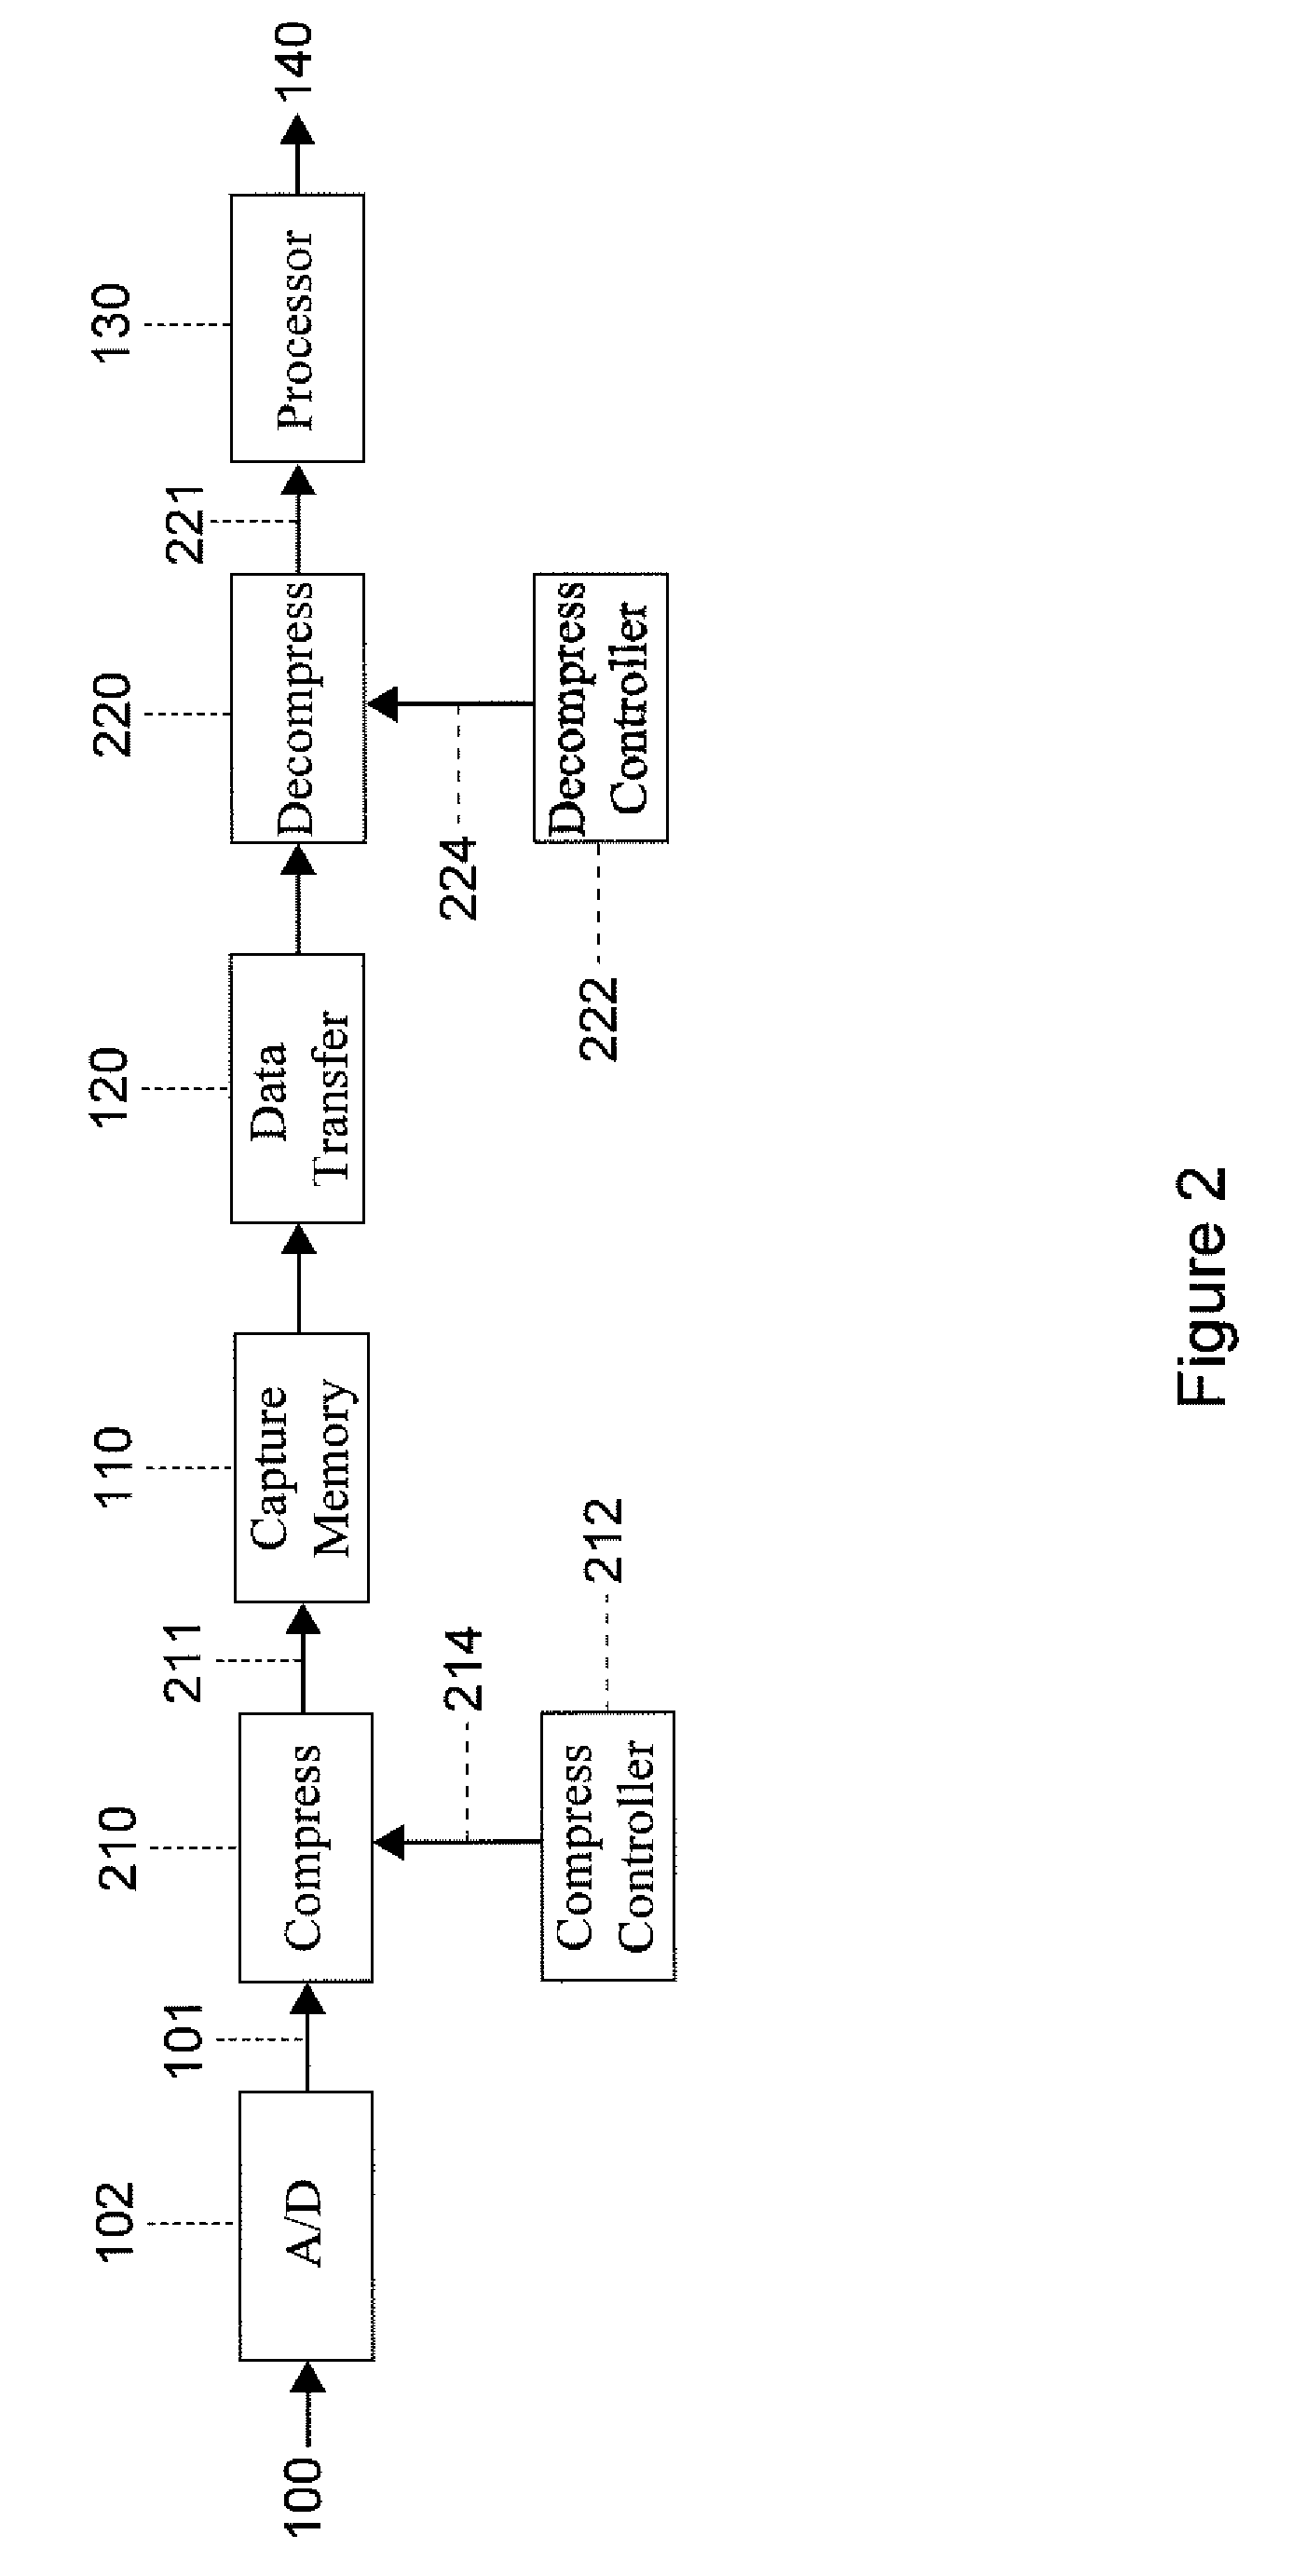 Frequency resolution using compression